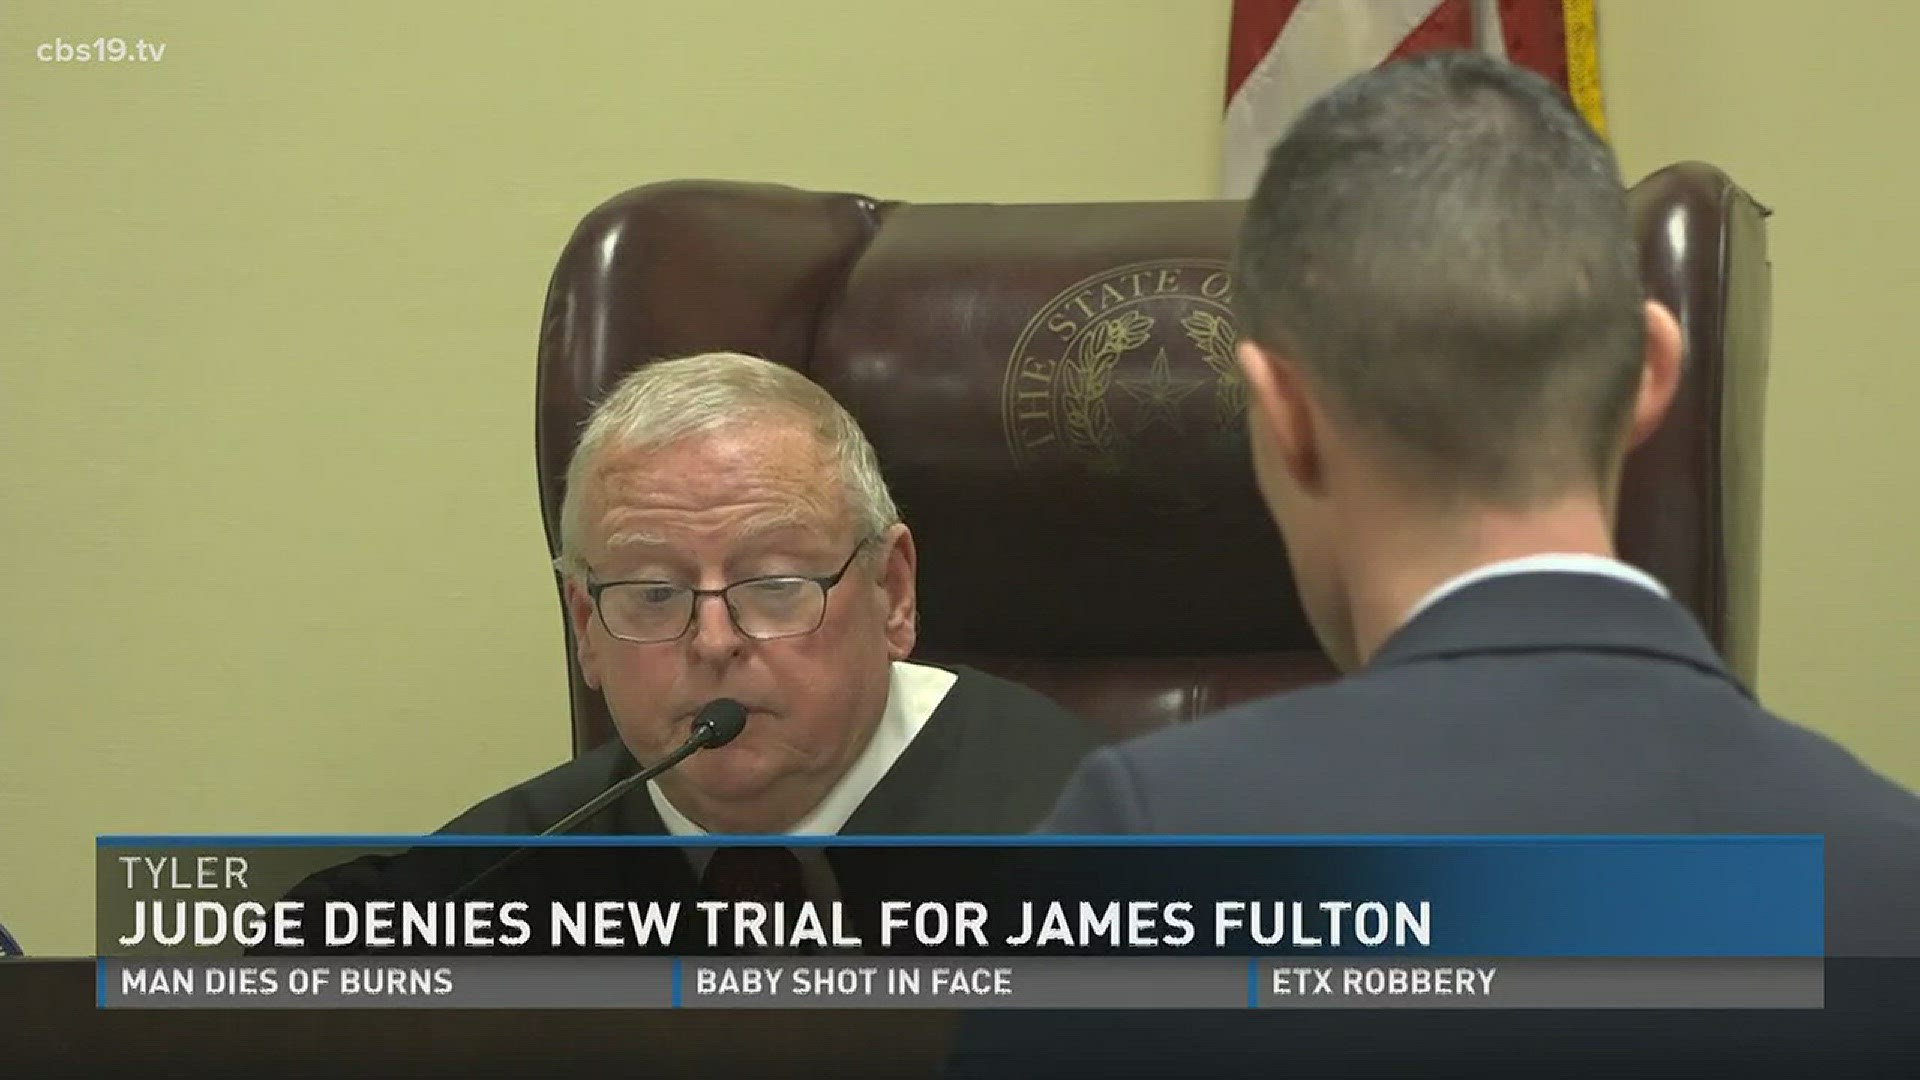 Judge denies new trial for James Fulton